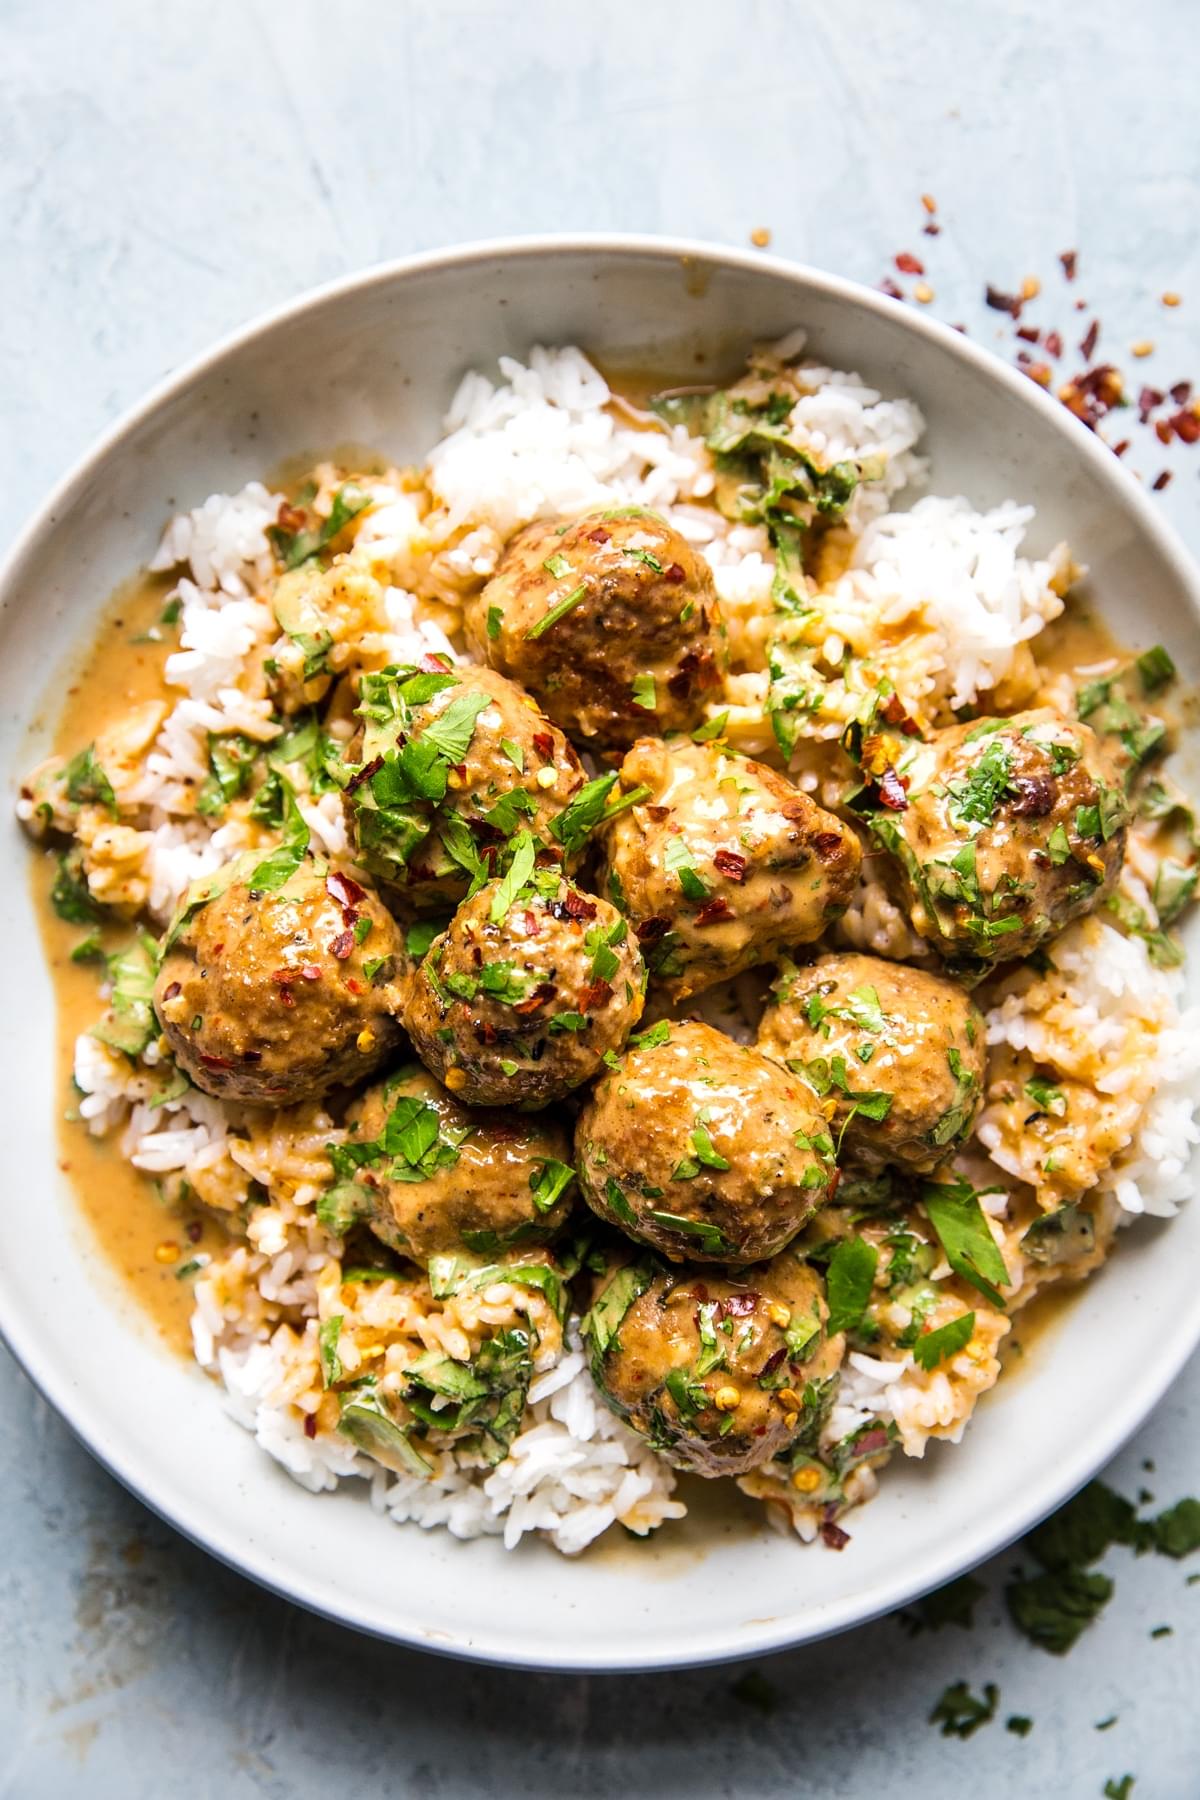 red curry turkey meatballs in a coconut curry sauce over white rice in a bowl